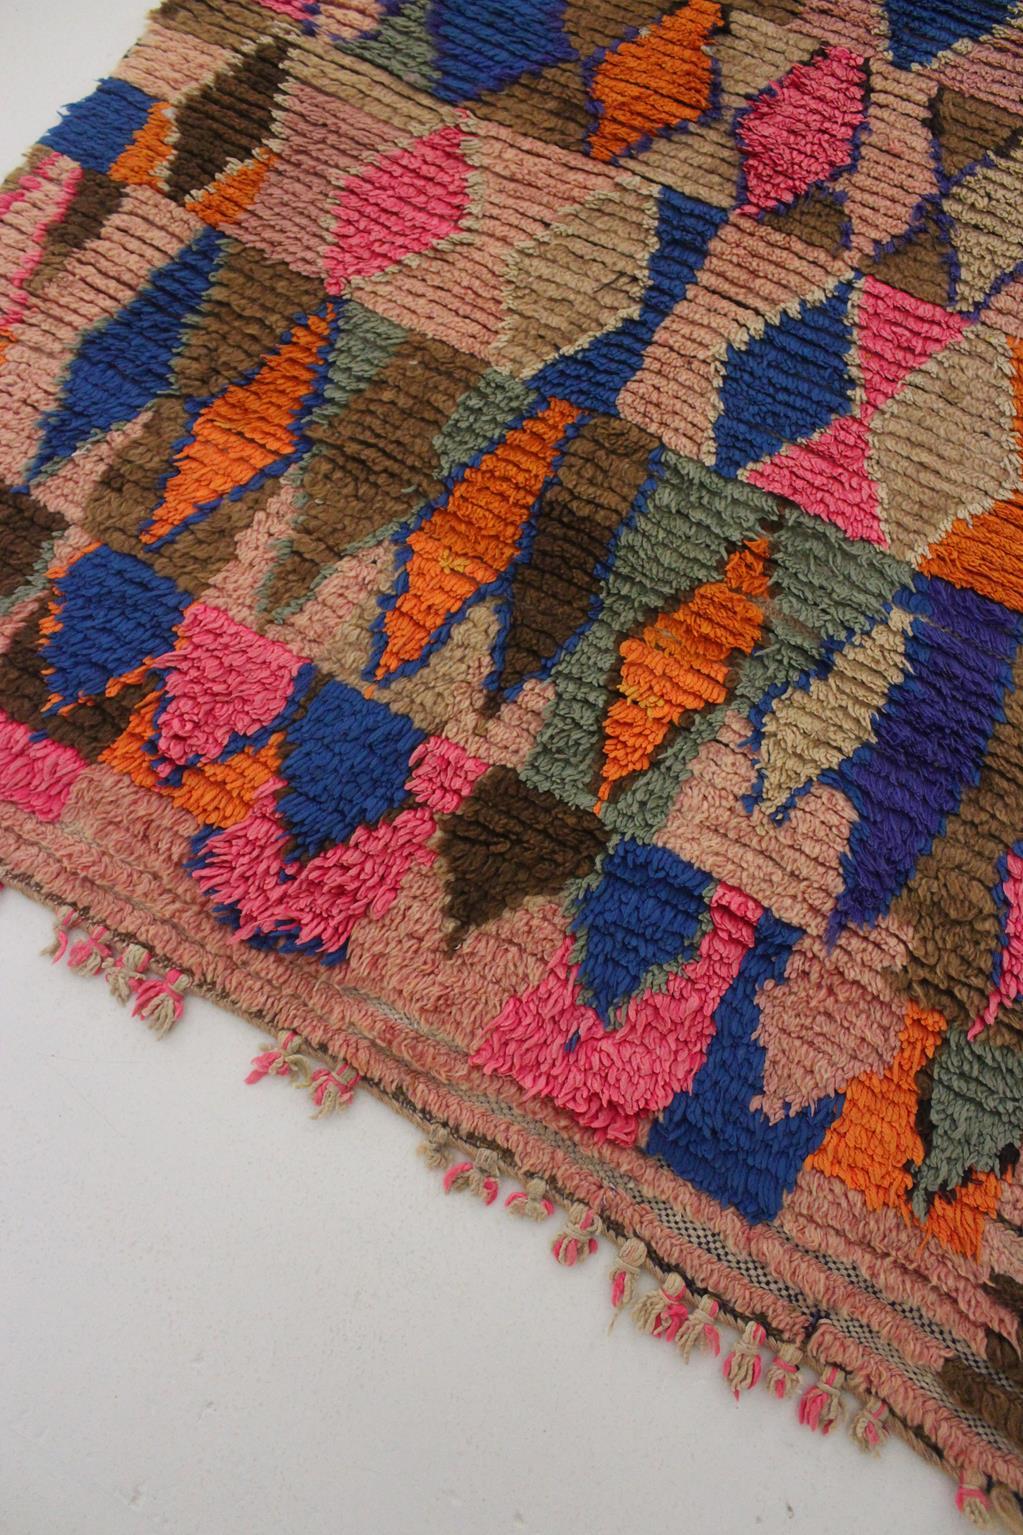 20th Century Vintage Moroccan Boujad runner rug - Pink/brown/blue - 3.2x10feet / 97x307cm For Sale